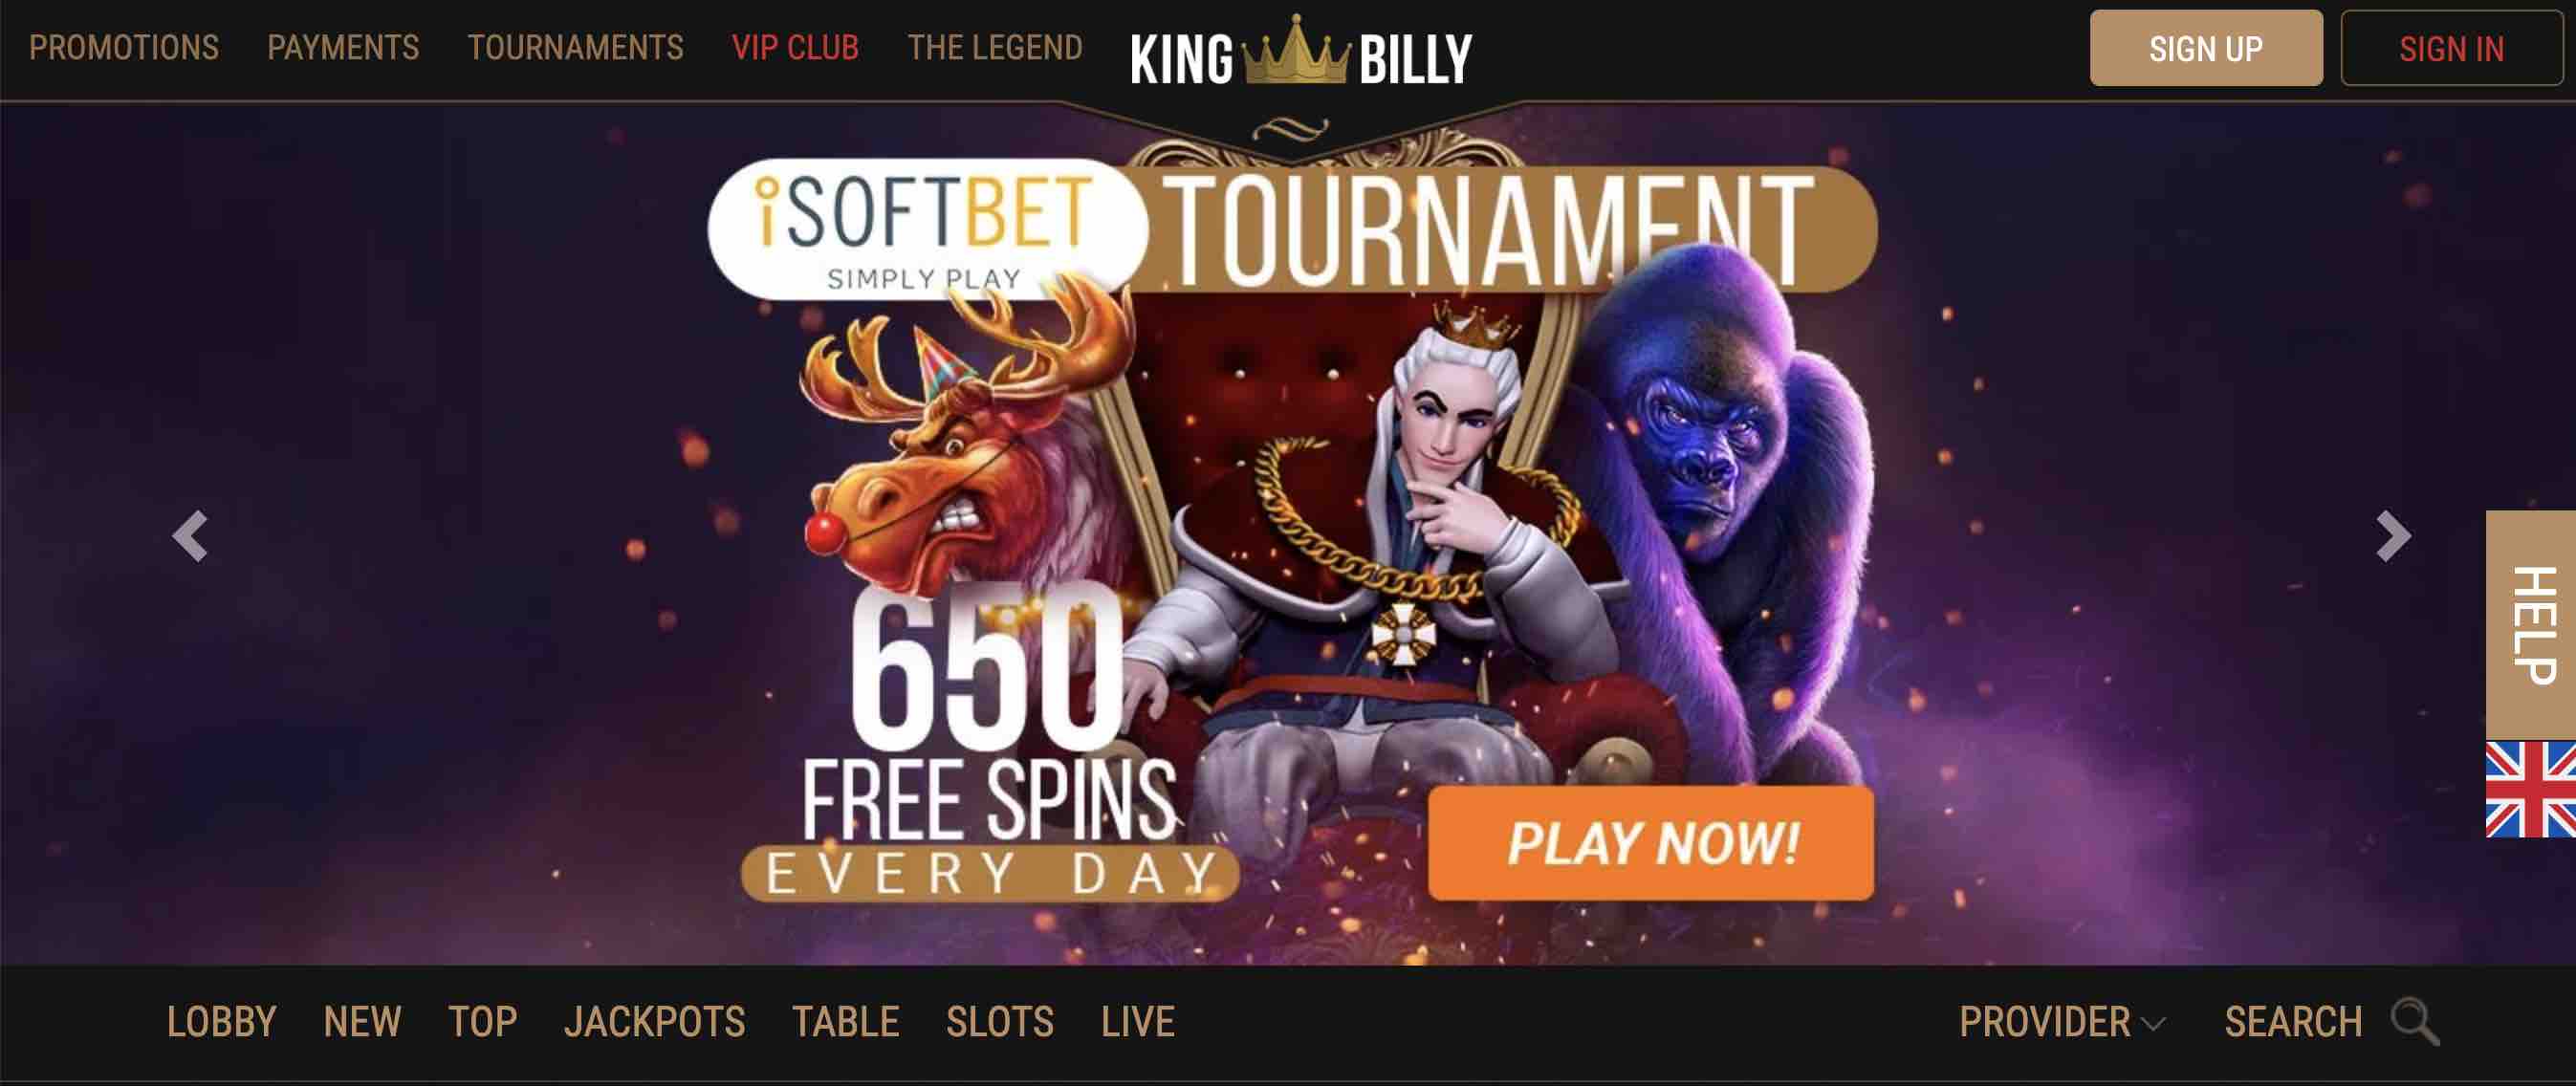 Tournaments at King Billy Casino